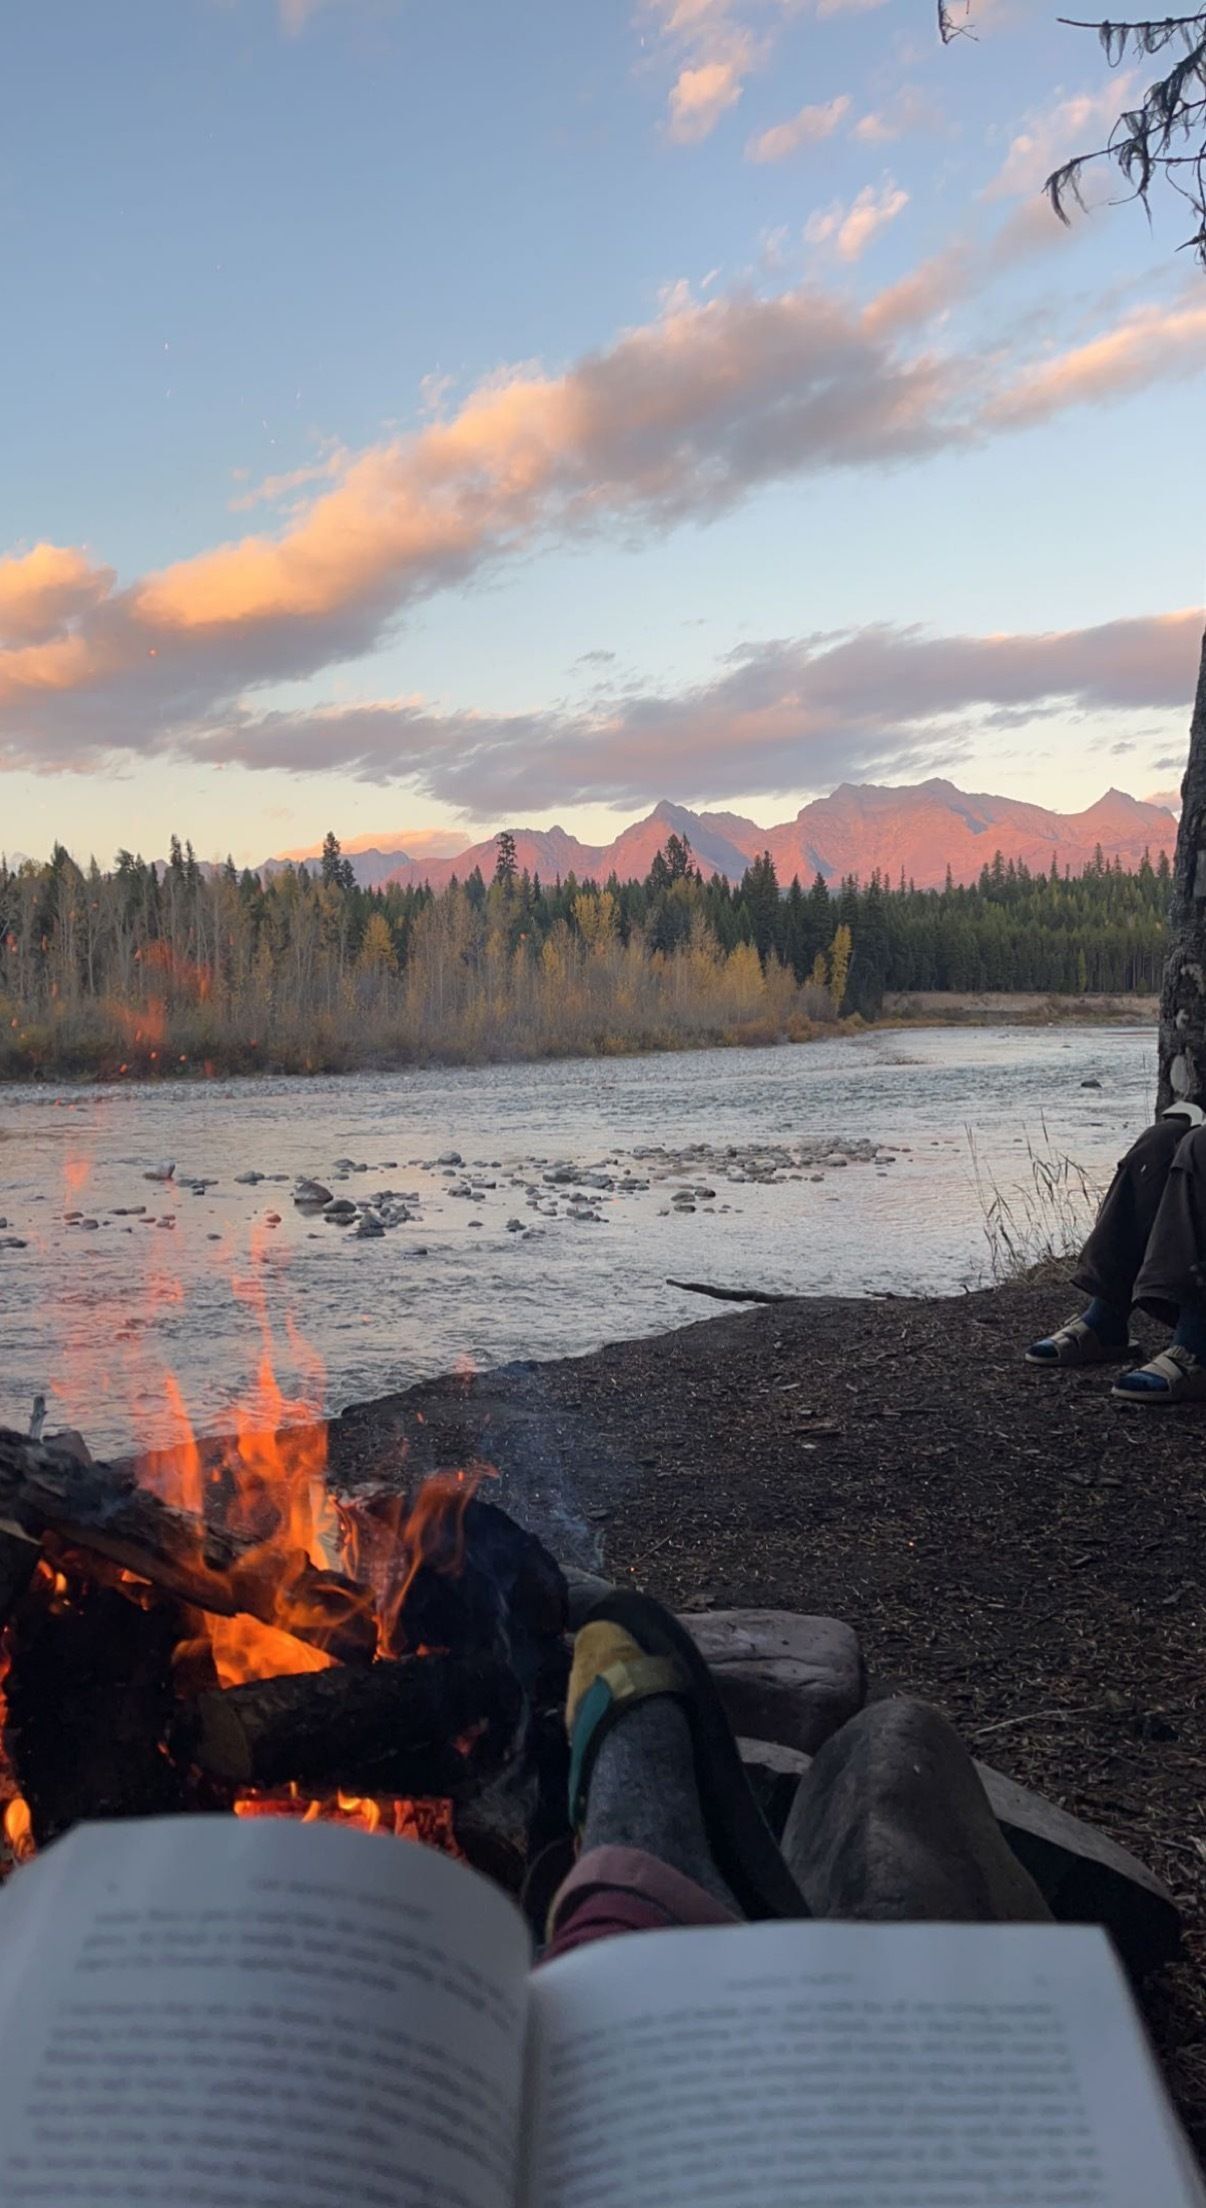 A person sits on a stream bank, with a burning campfire in front of them and mountains in the distance.